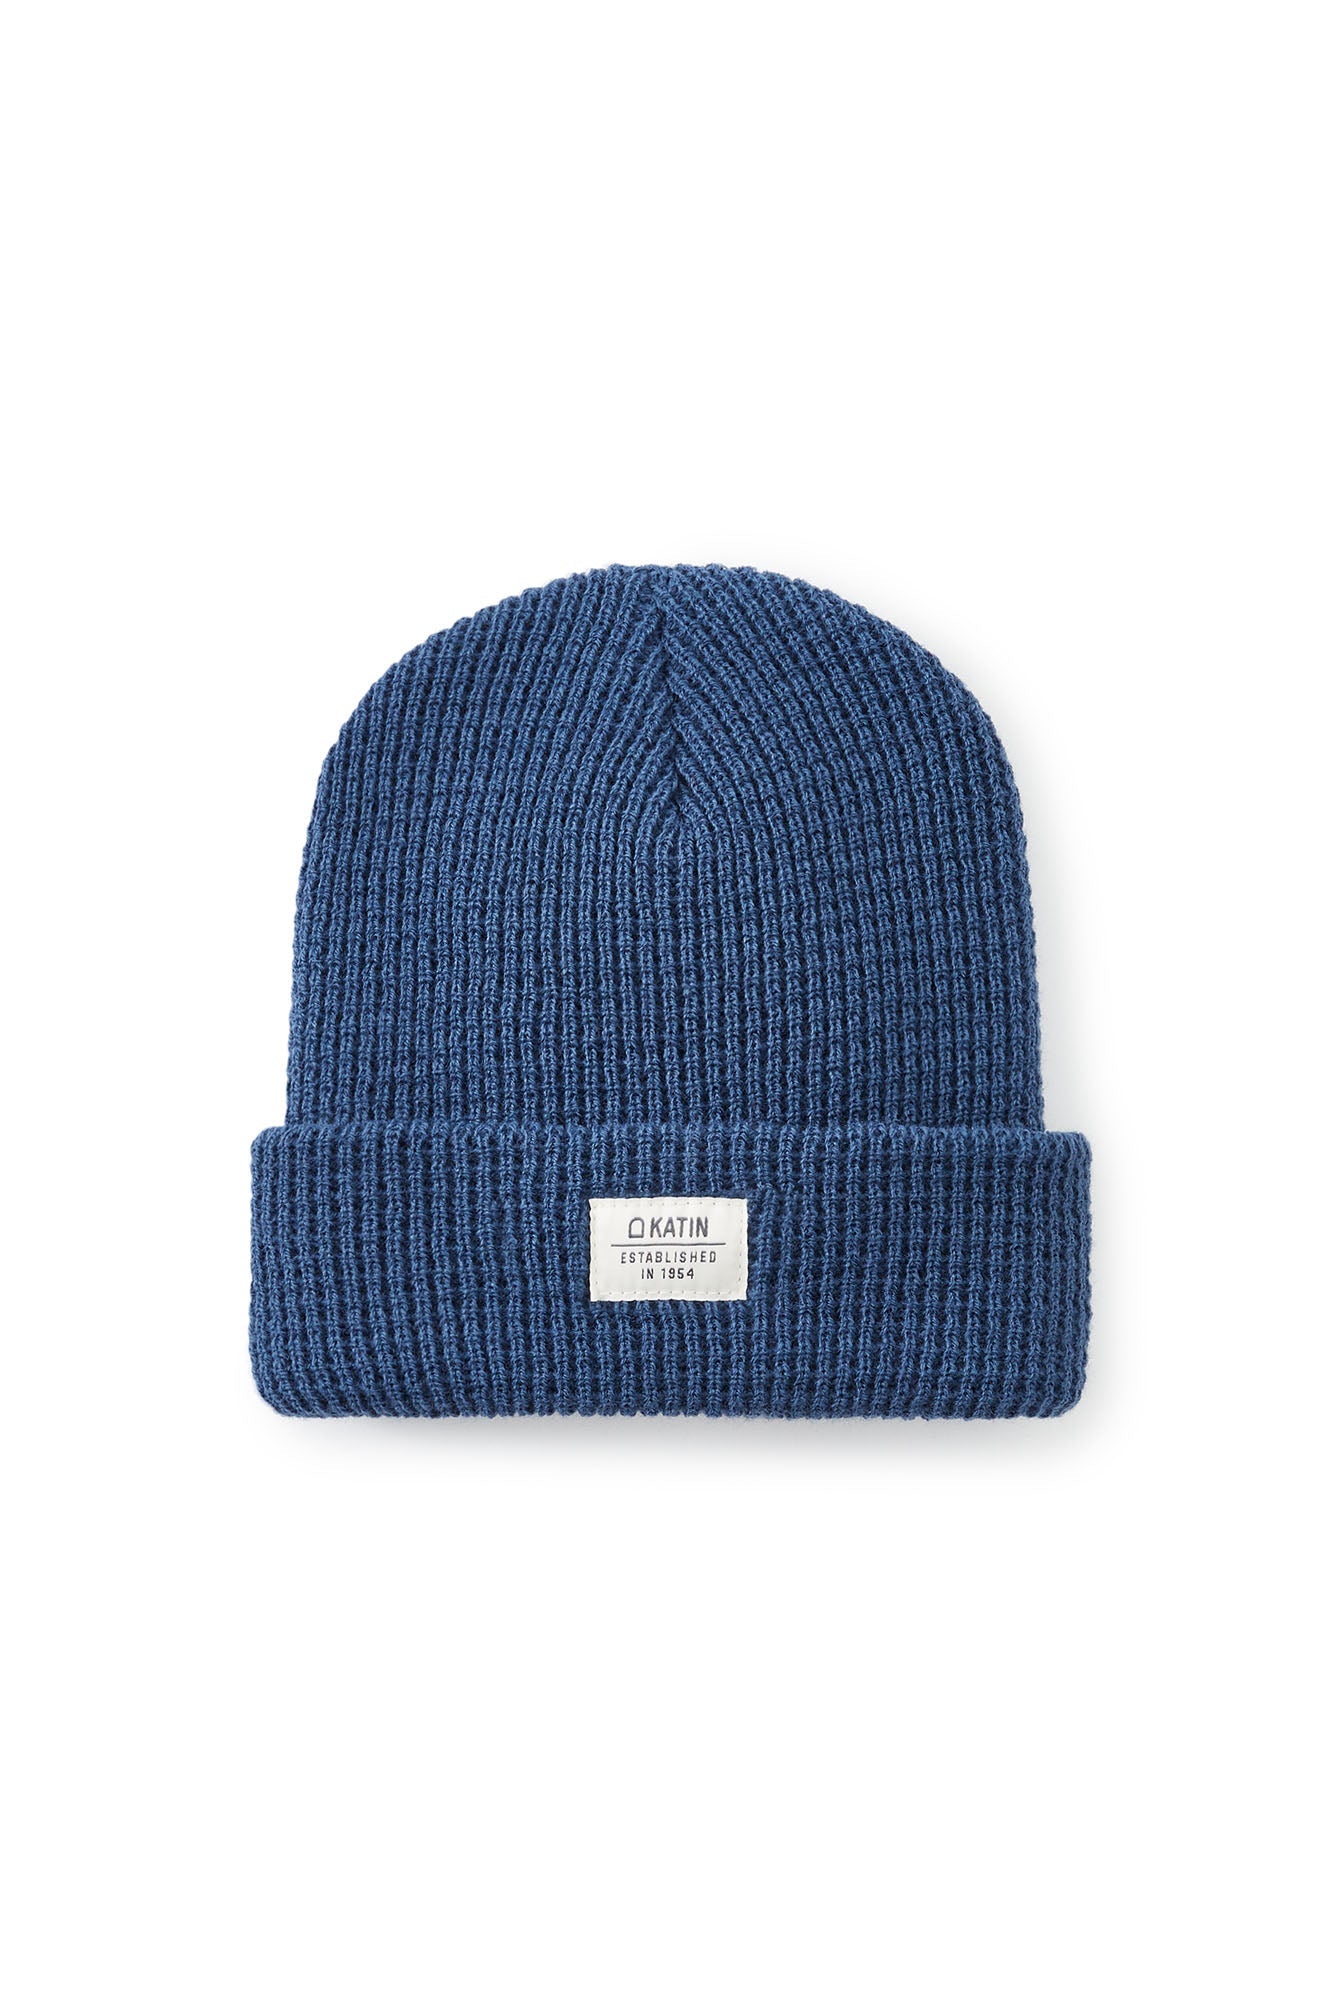 Katin Wade Knit Beanie - Steel Blue front